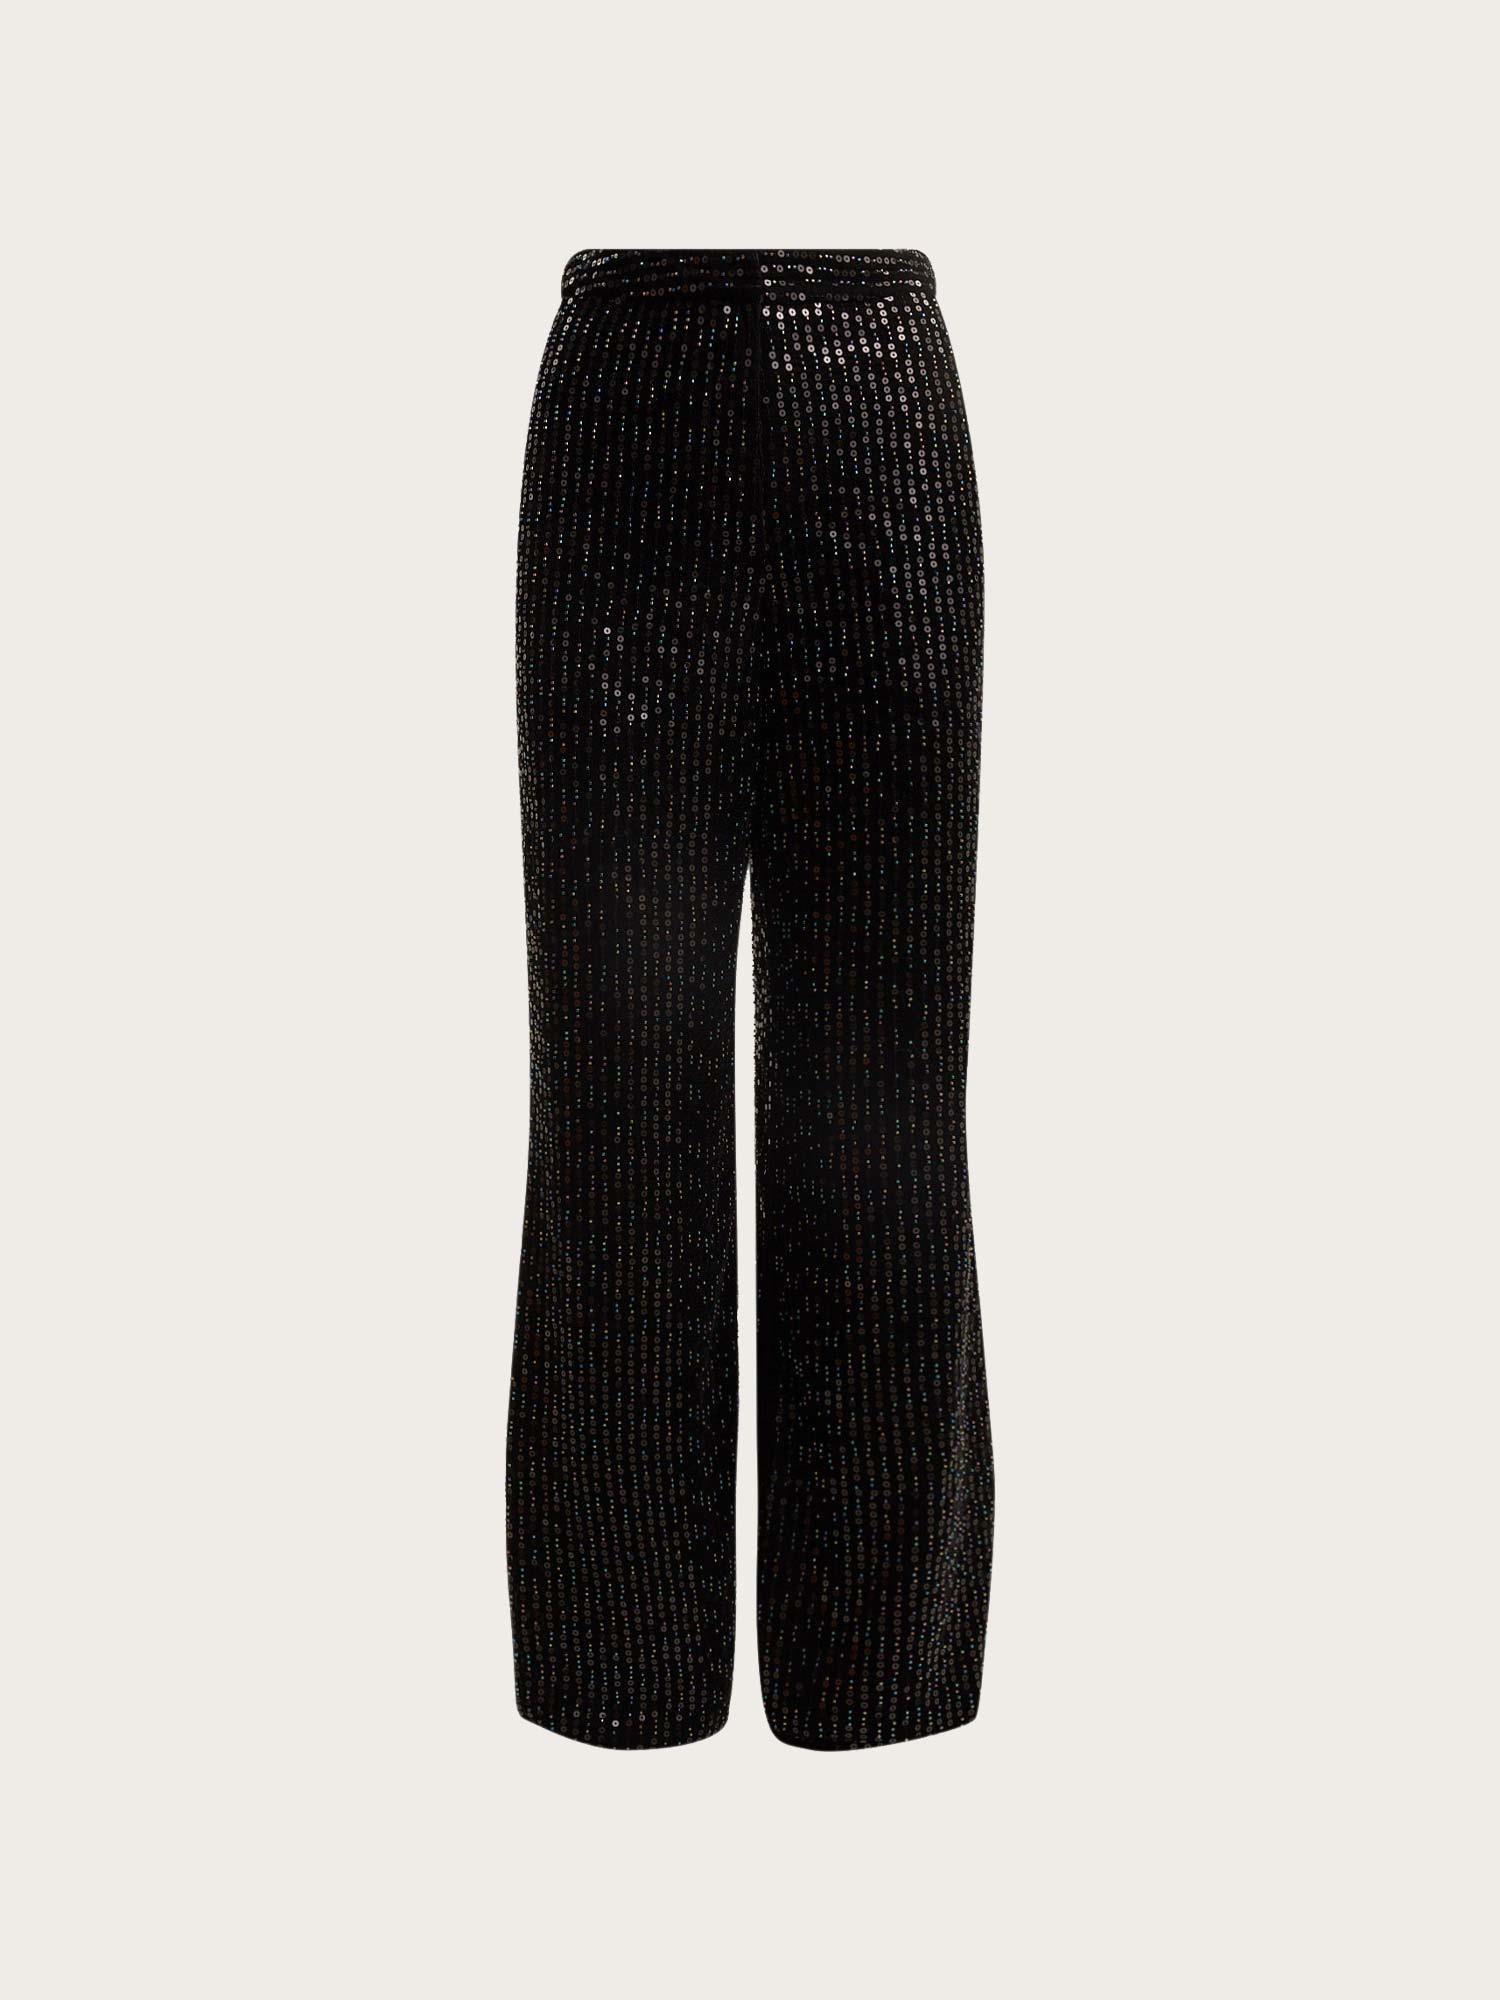 Jagger Sequin Trousers - Black